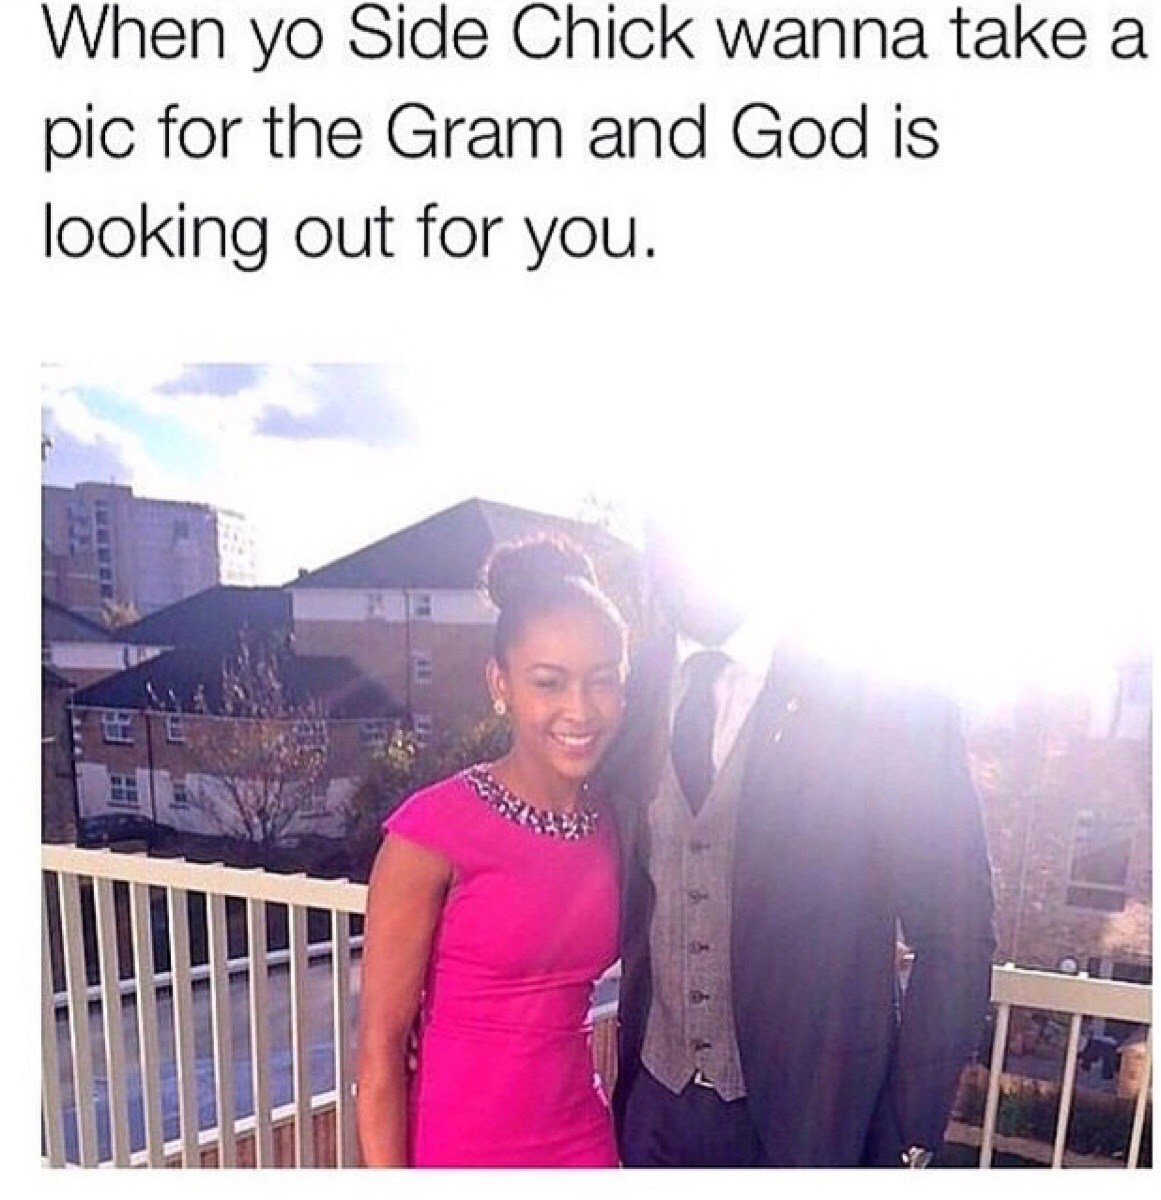 God lookin out for a hustler